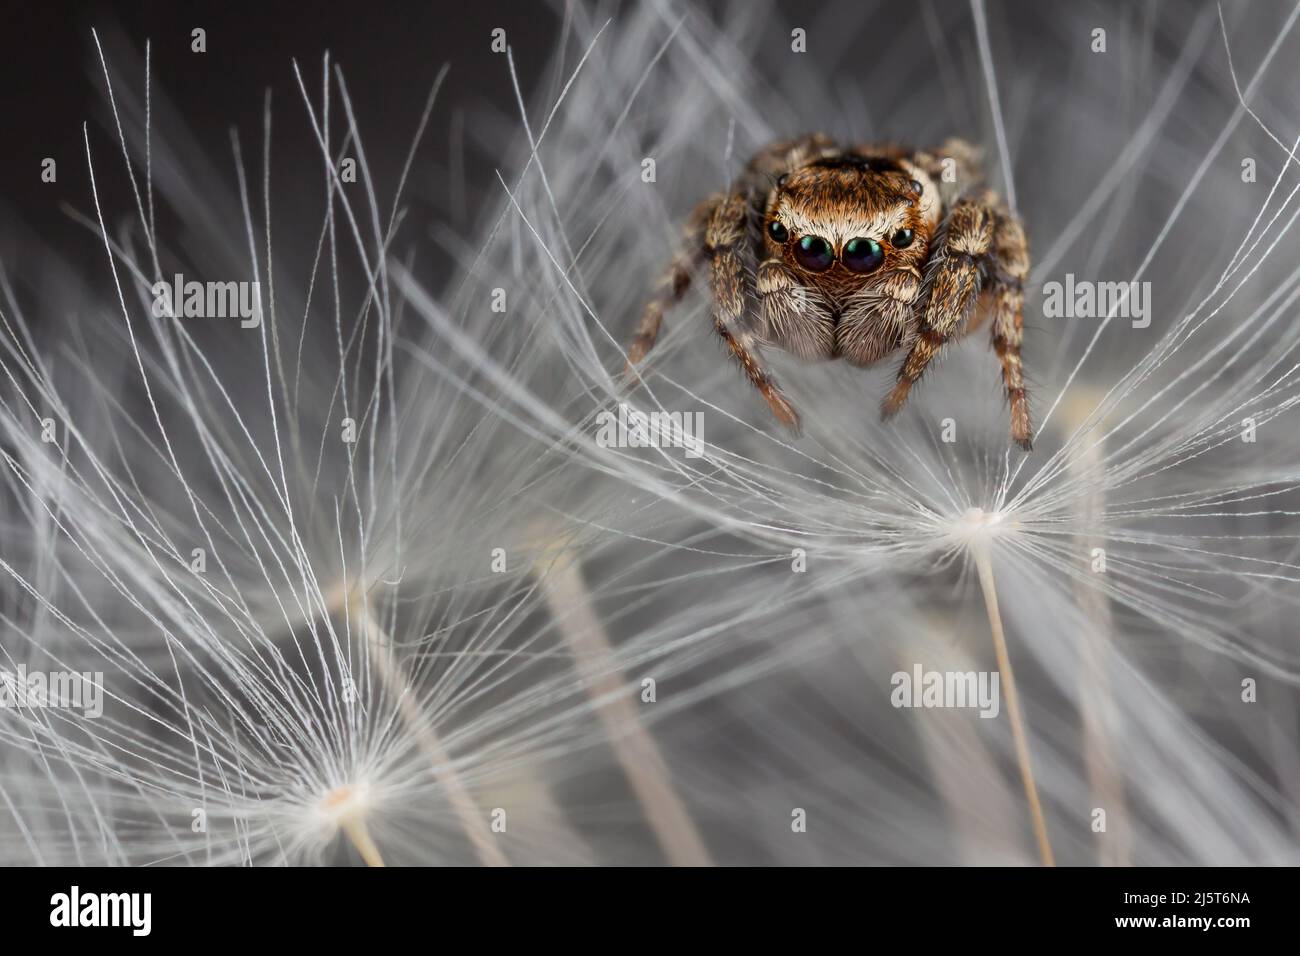 Jumping spider walking on the white dandelion fluff Stock Photo